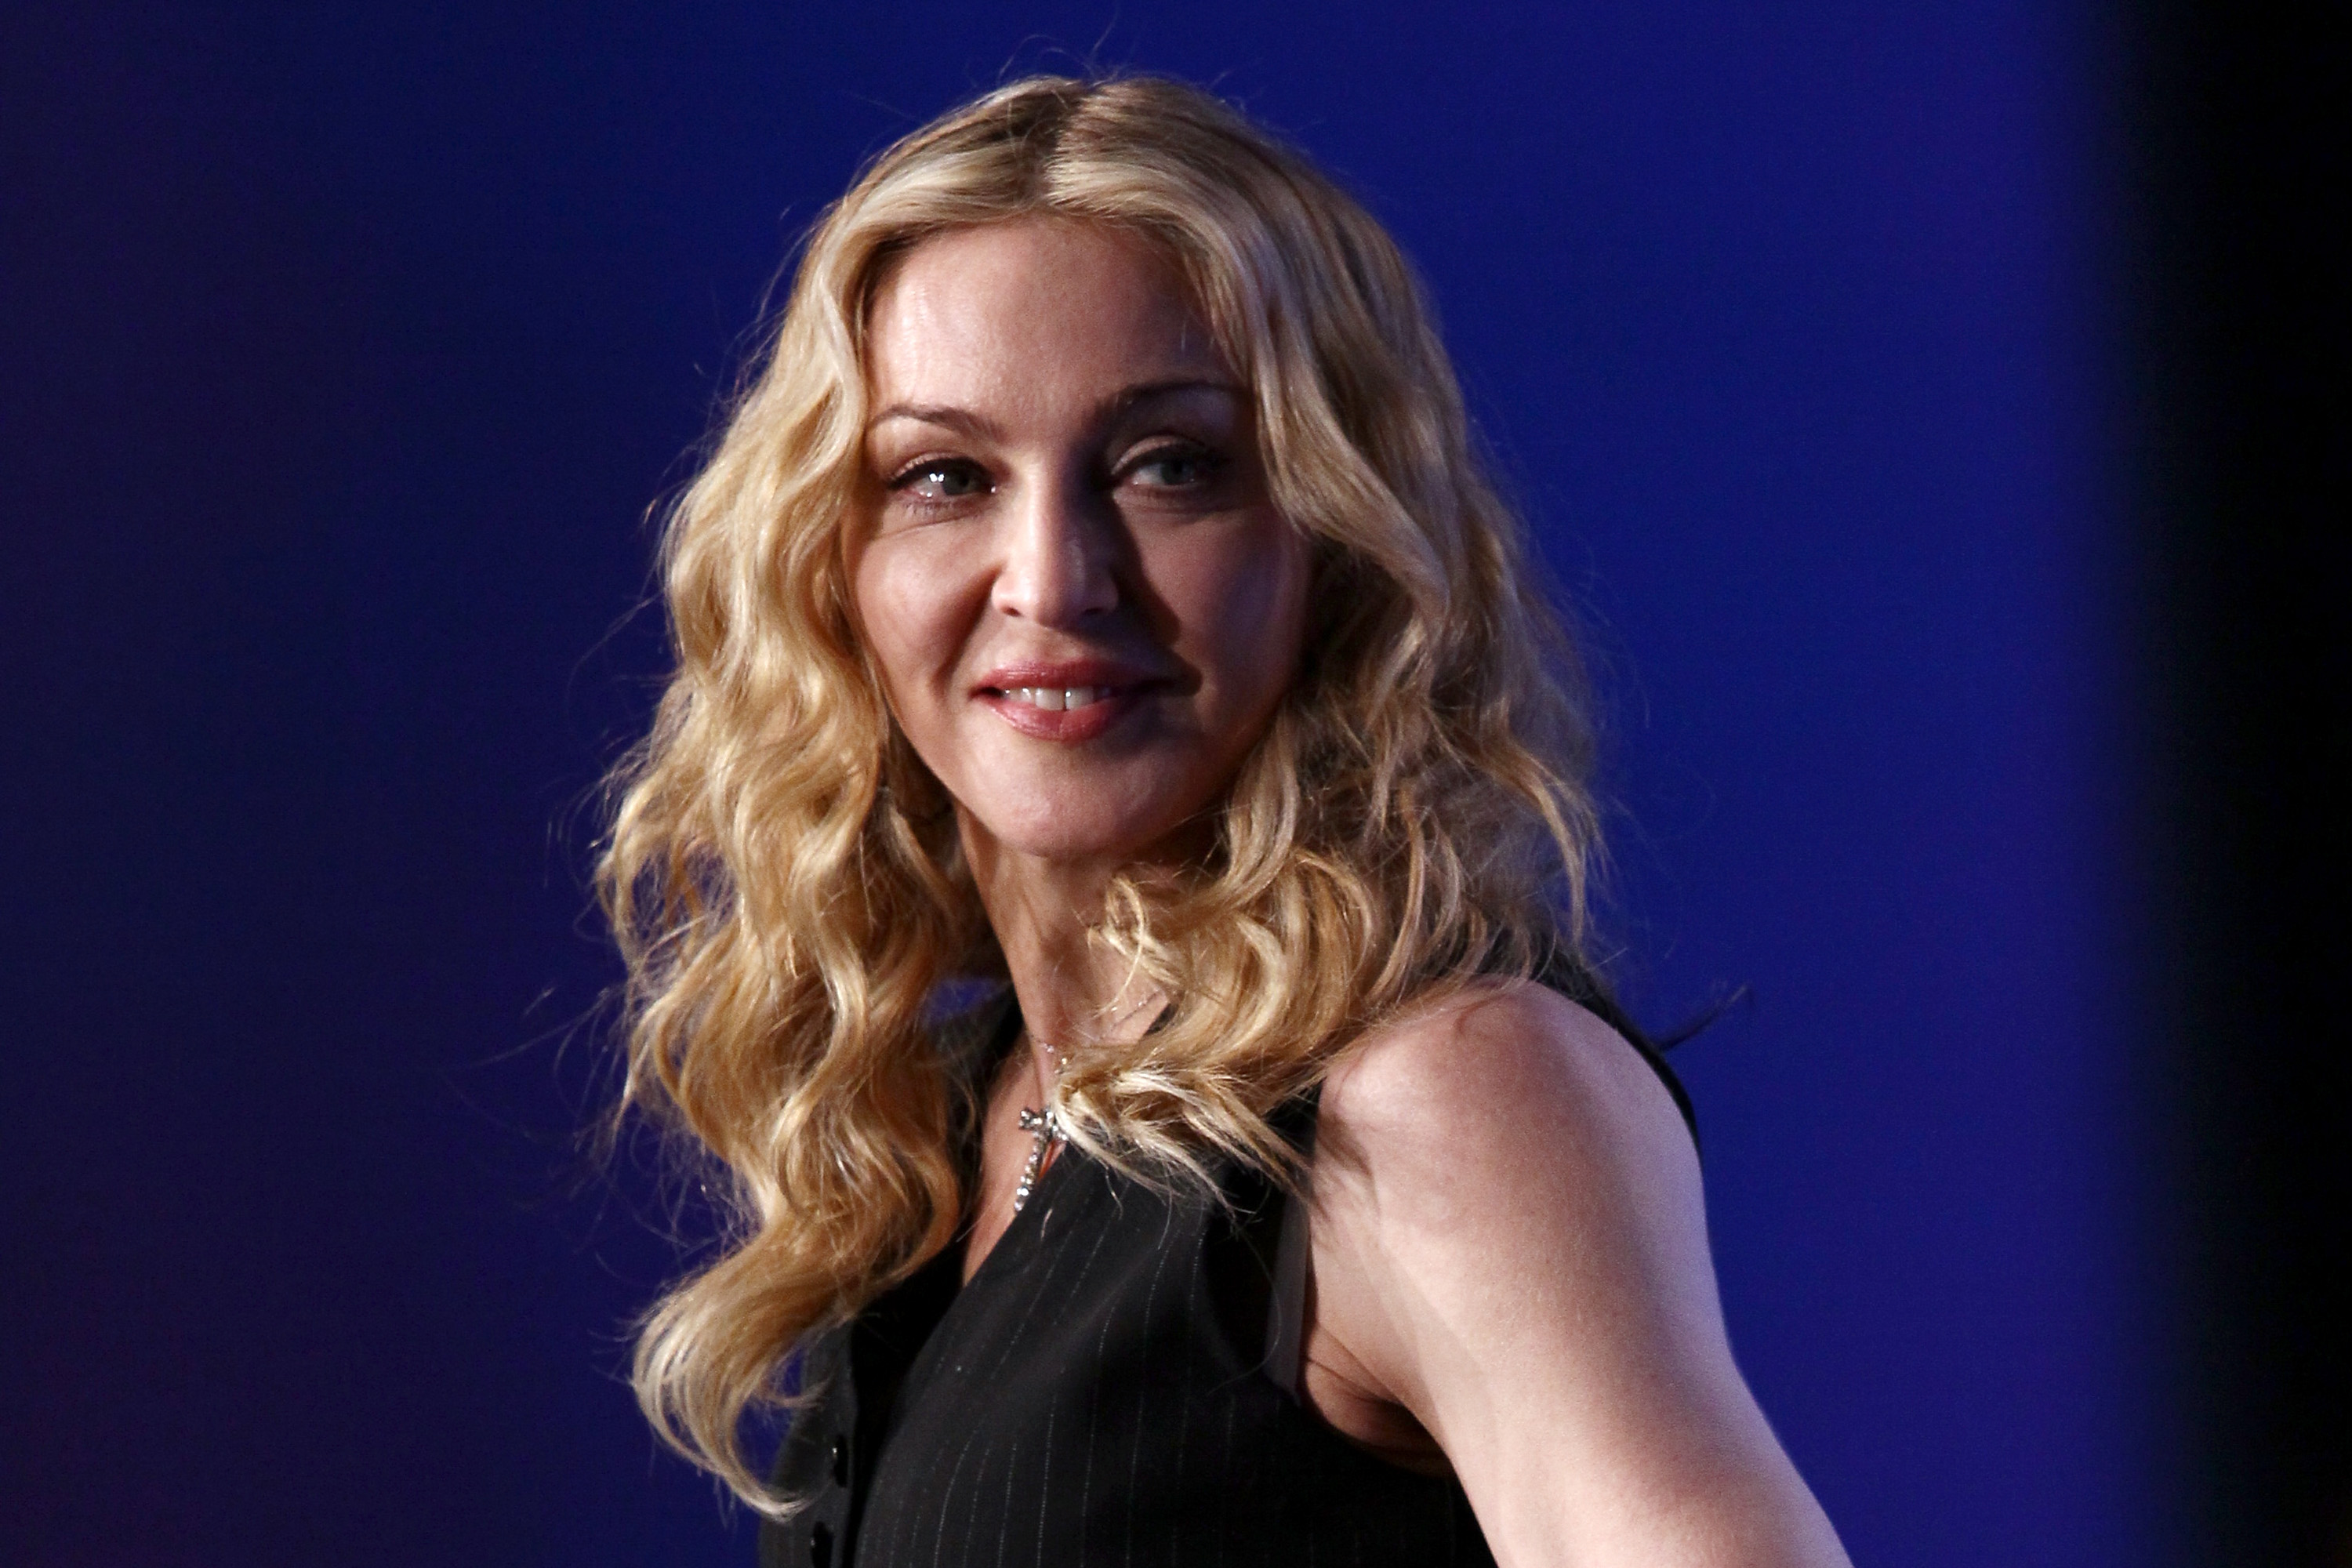 INDIANAPOLIS, IN - FEBRUARY 02: Singer Madonna looks on on during a press conference for the Bridgestone Super Bowl XLVI halftime show at the Super Bowl XLVI Media Center in the J.W. Marriott Indianapolis on February 2, 2012 in Indianapolis, Indiana.